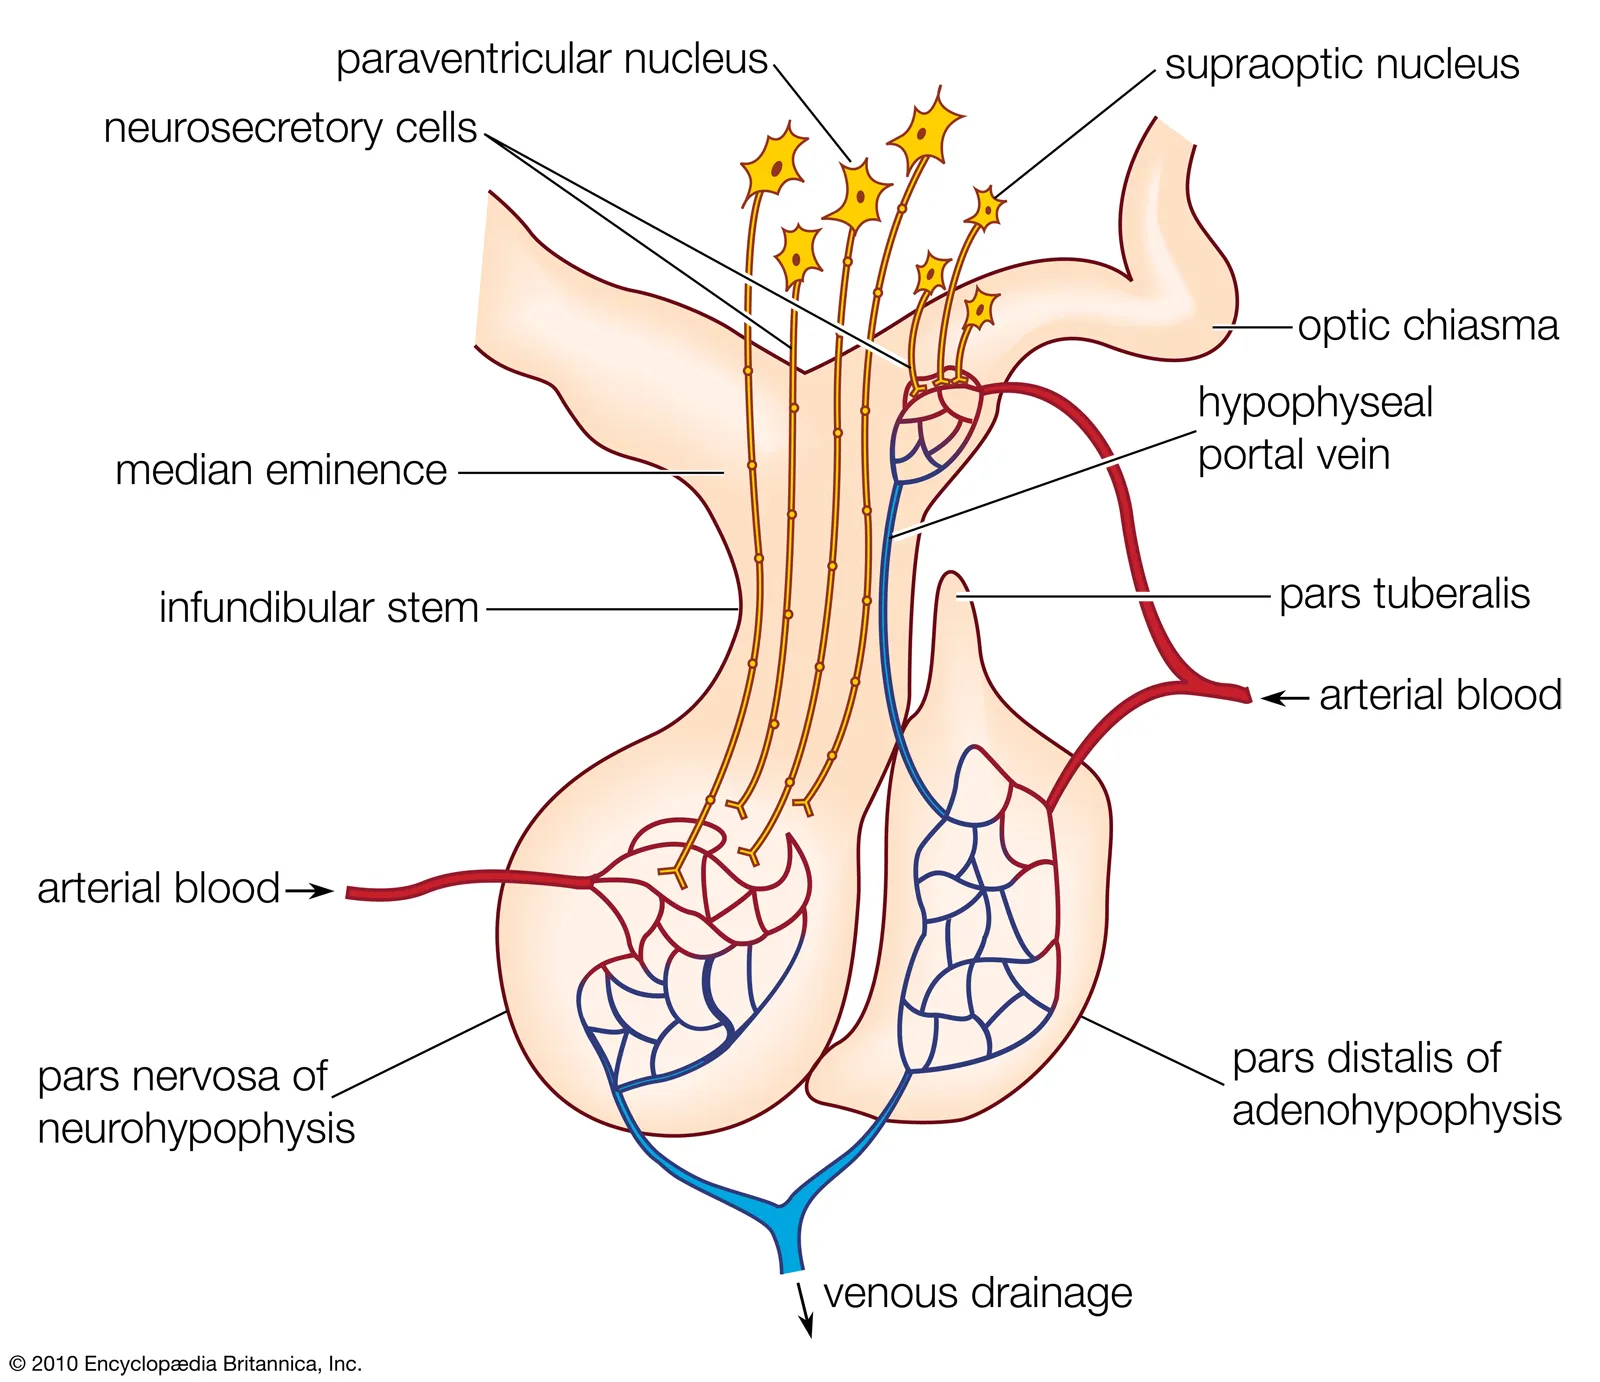 <p>❀Neuroendocrine cells, also known as neurosecretory cells, release hormones from their synaptic terminals into the bloodstream. </p><p>❀This release is controlled via synaptic transmission from presynaptic neurons, a process referred to as <span class="tt-bg-yellow">neuroendocrine integration. </span></p><p><u>Examples of neuroendocrine cells include:</u></p><p><strong>❀Magno and Parvocellular Neurons of the Hypothalamus</strong>: These neurons secrete various hormones that regulate the pituitary gland and, consequently, other endocrine organs.</p><p><strong>❀Chromaffin Cells of the Adrenal Medulla</strong>: These cells release hormones such as adrenaline and noradrenaline directly into the bloodstream in response to neural signals, particularly during the "fight or flight" response.</p>